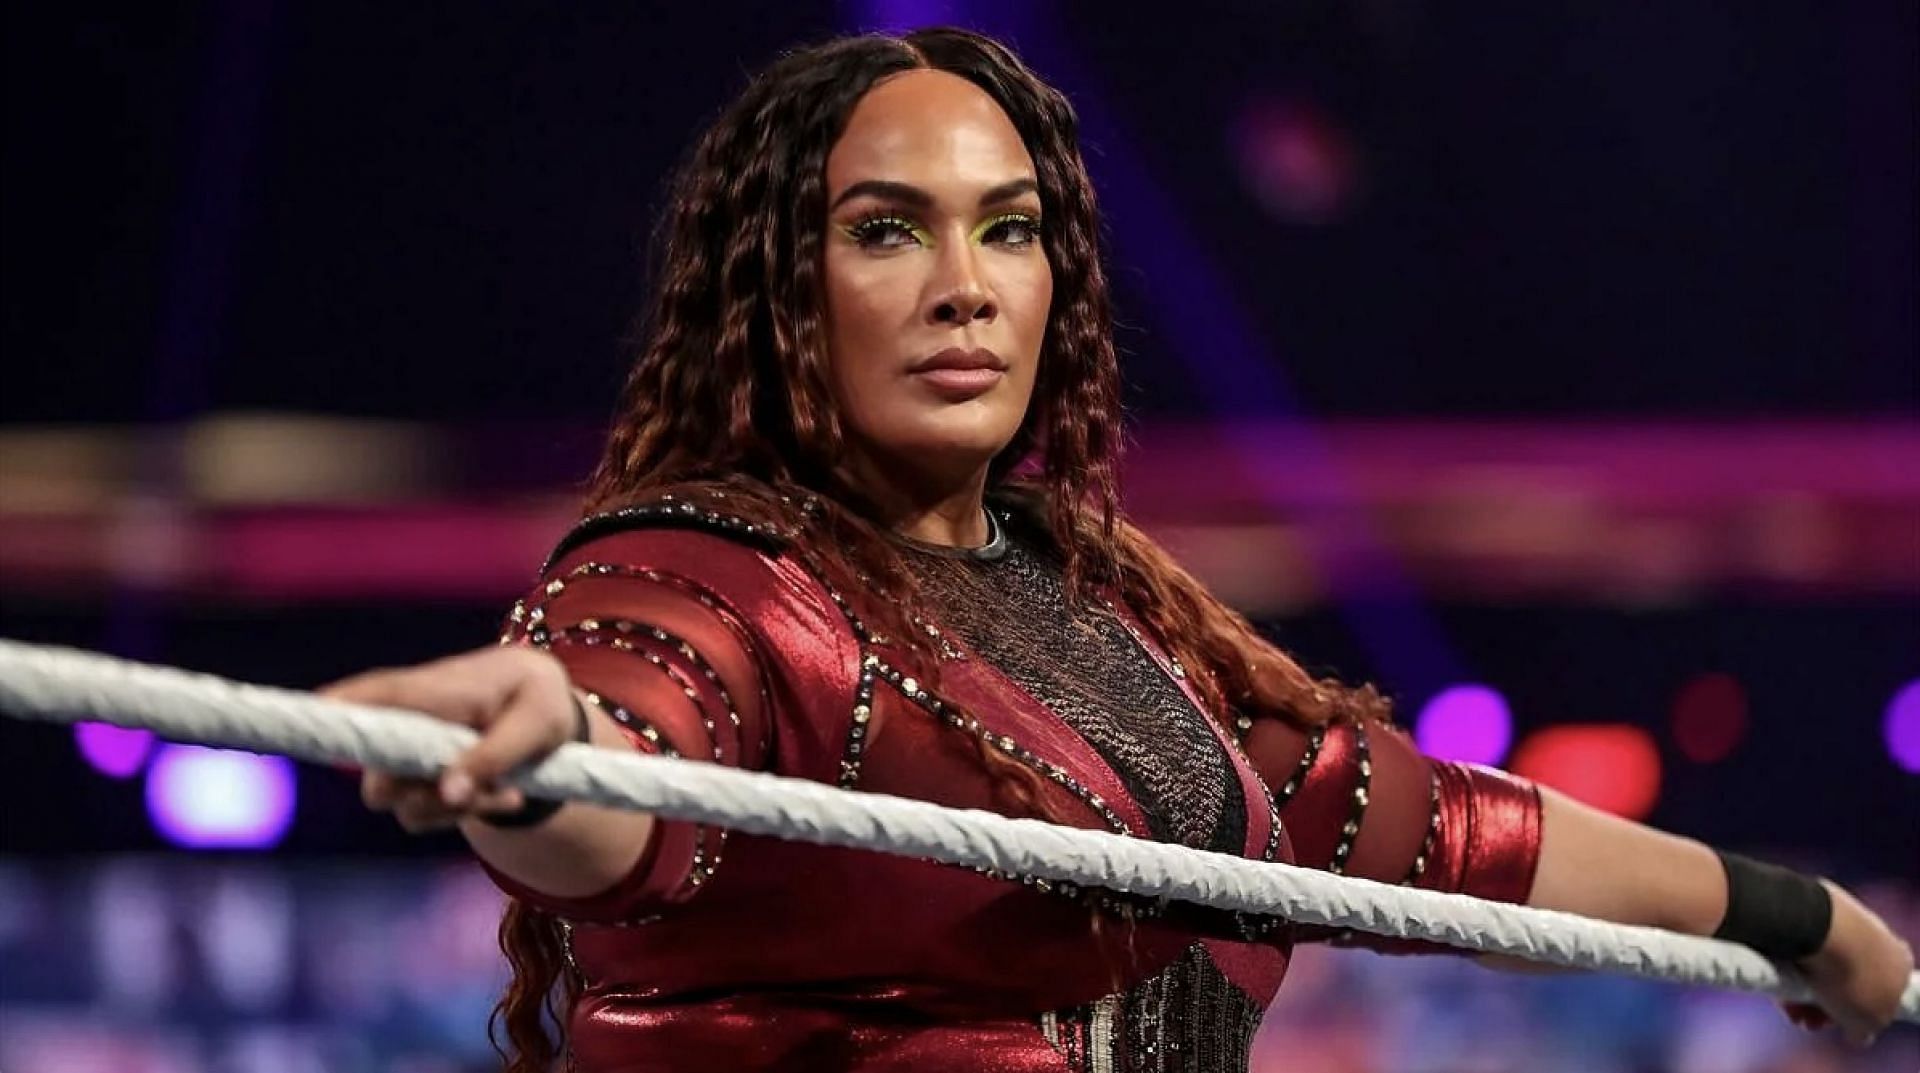 WWE News: Nia Jax reveals next move after getting released